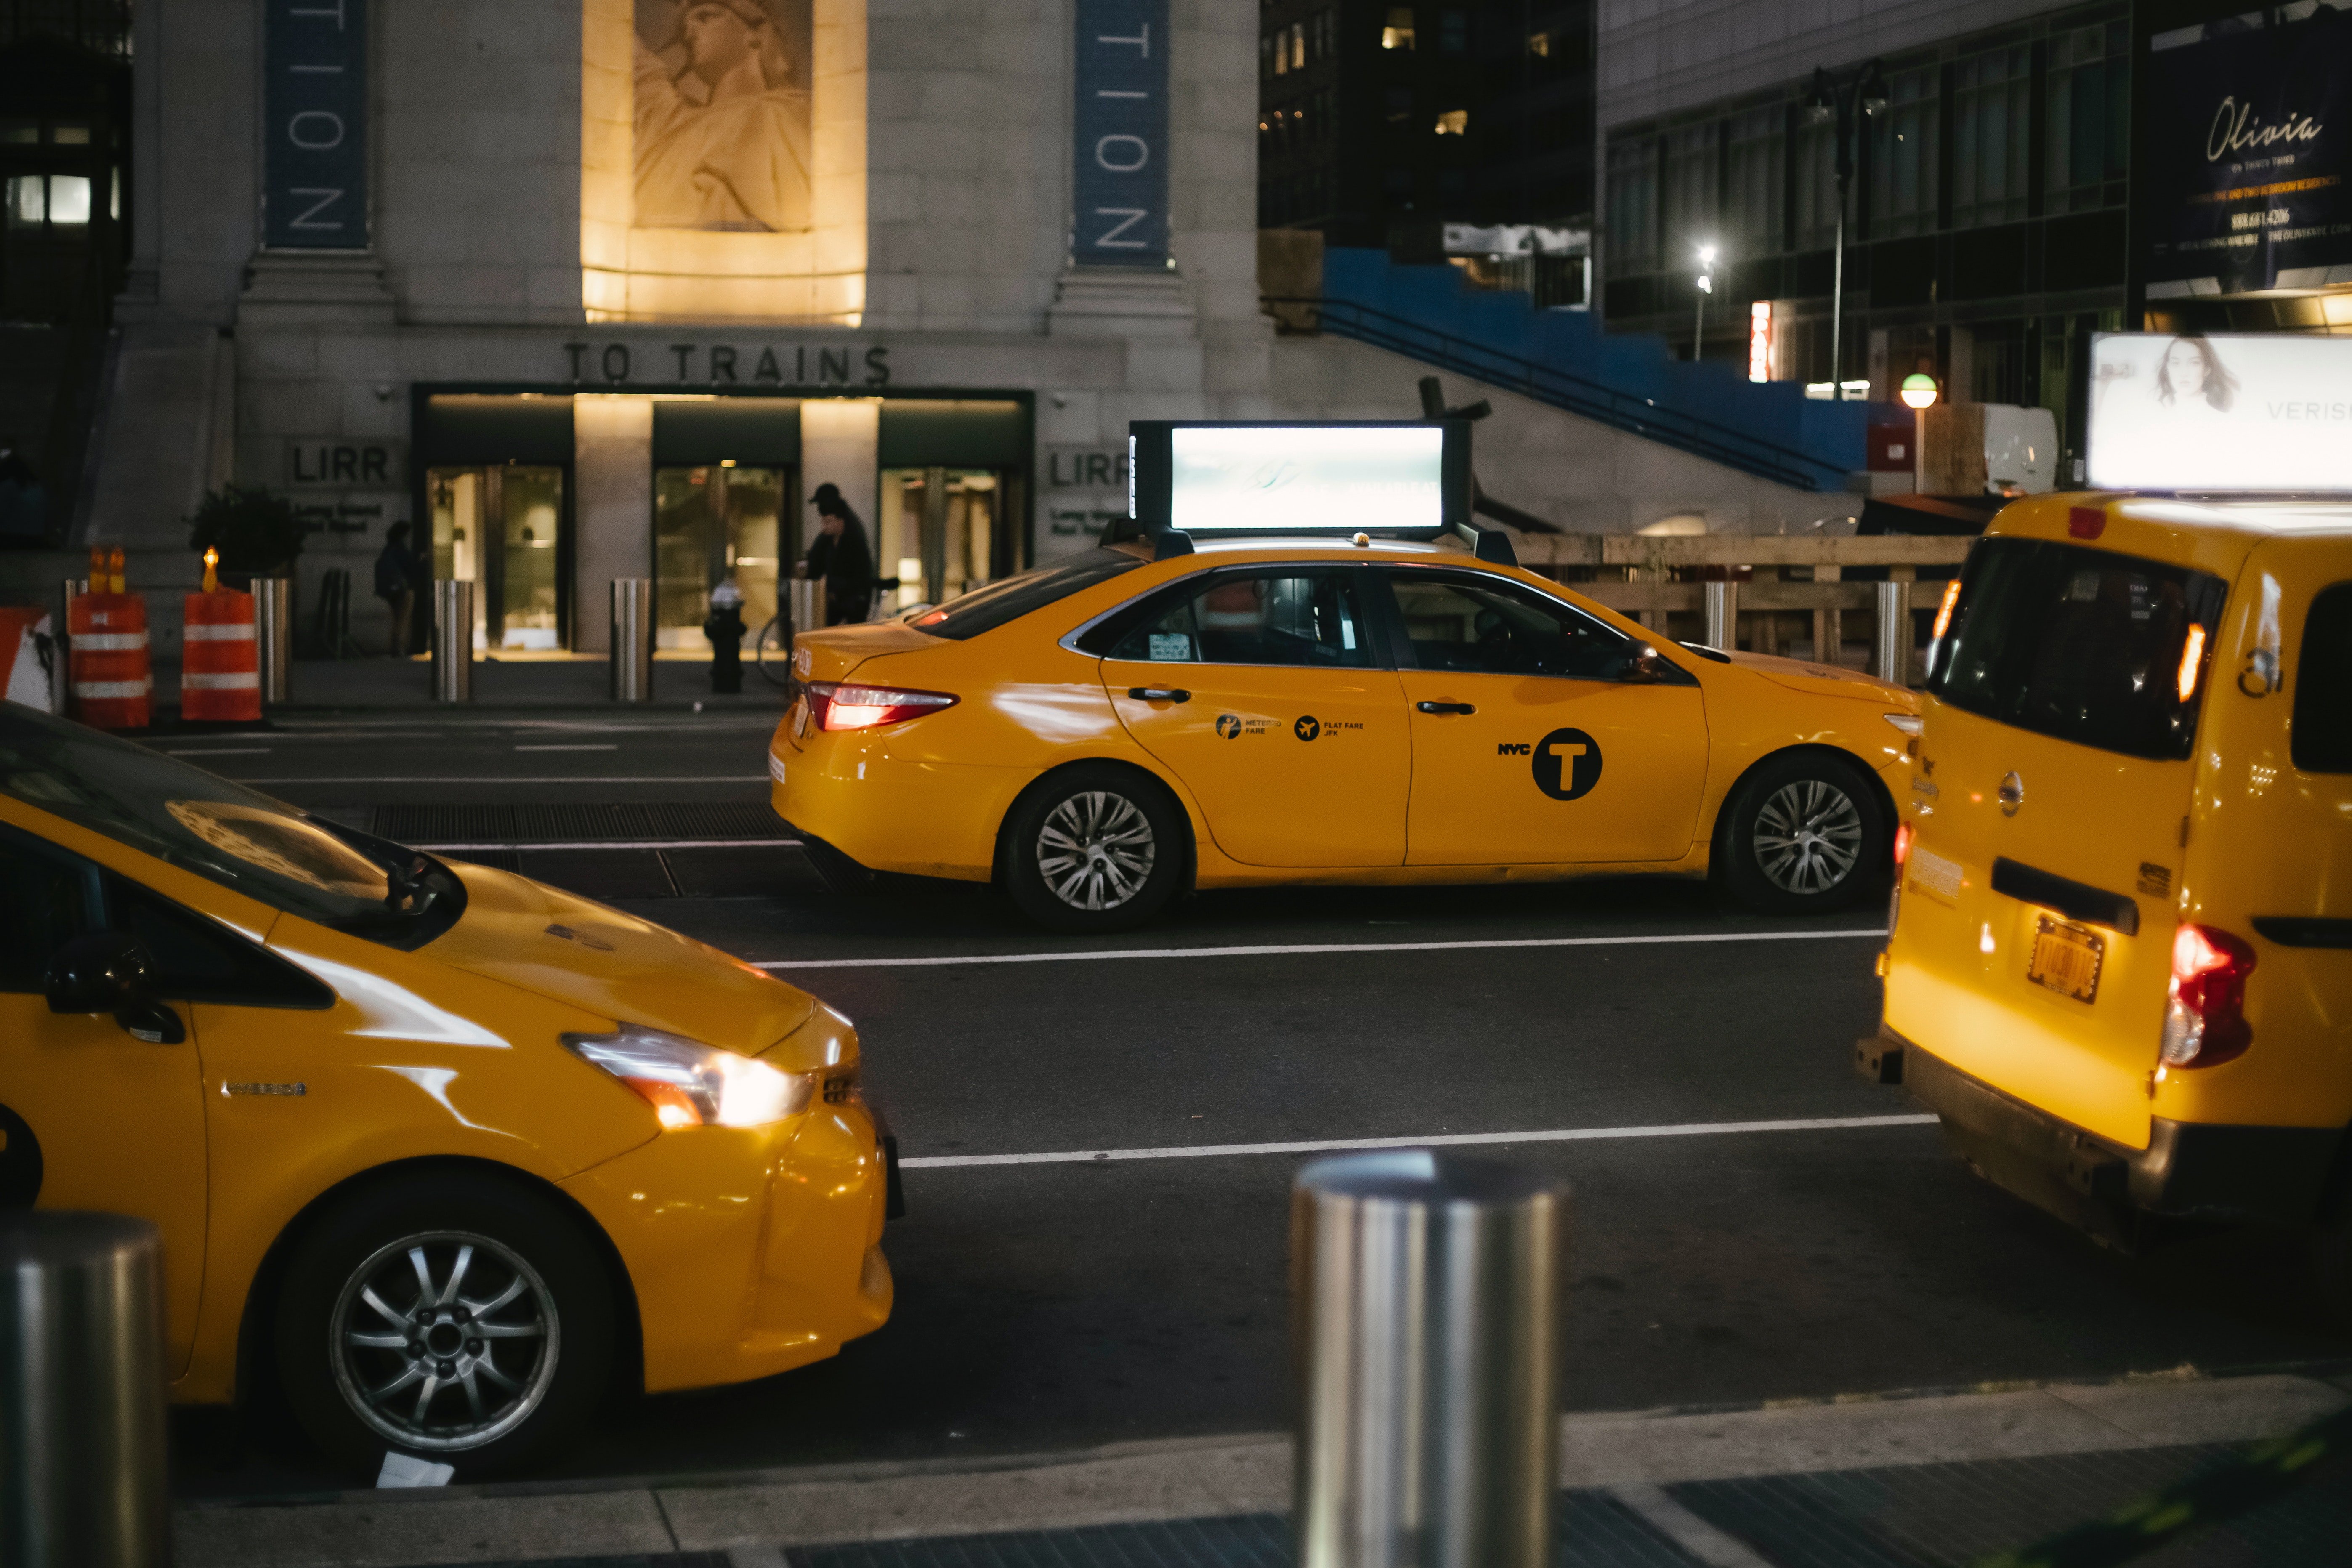 People adviced on the importance of cross-checking cabs & drivers before getting in | Photo: Pexels